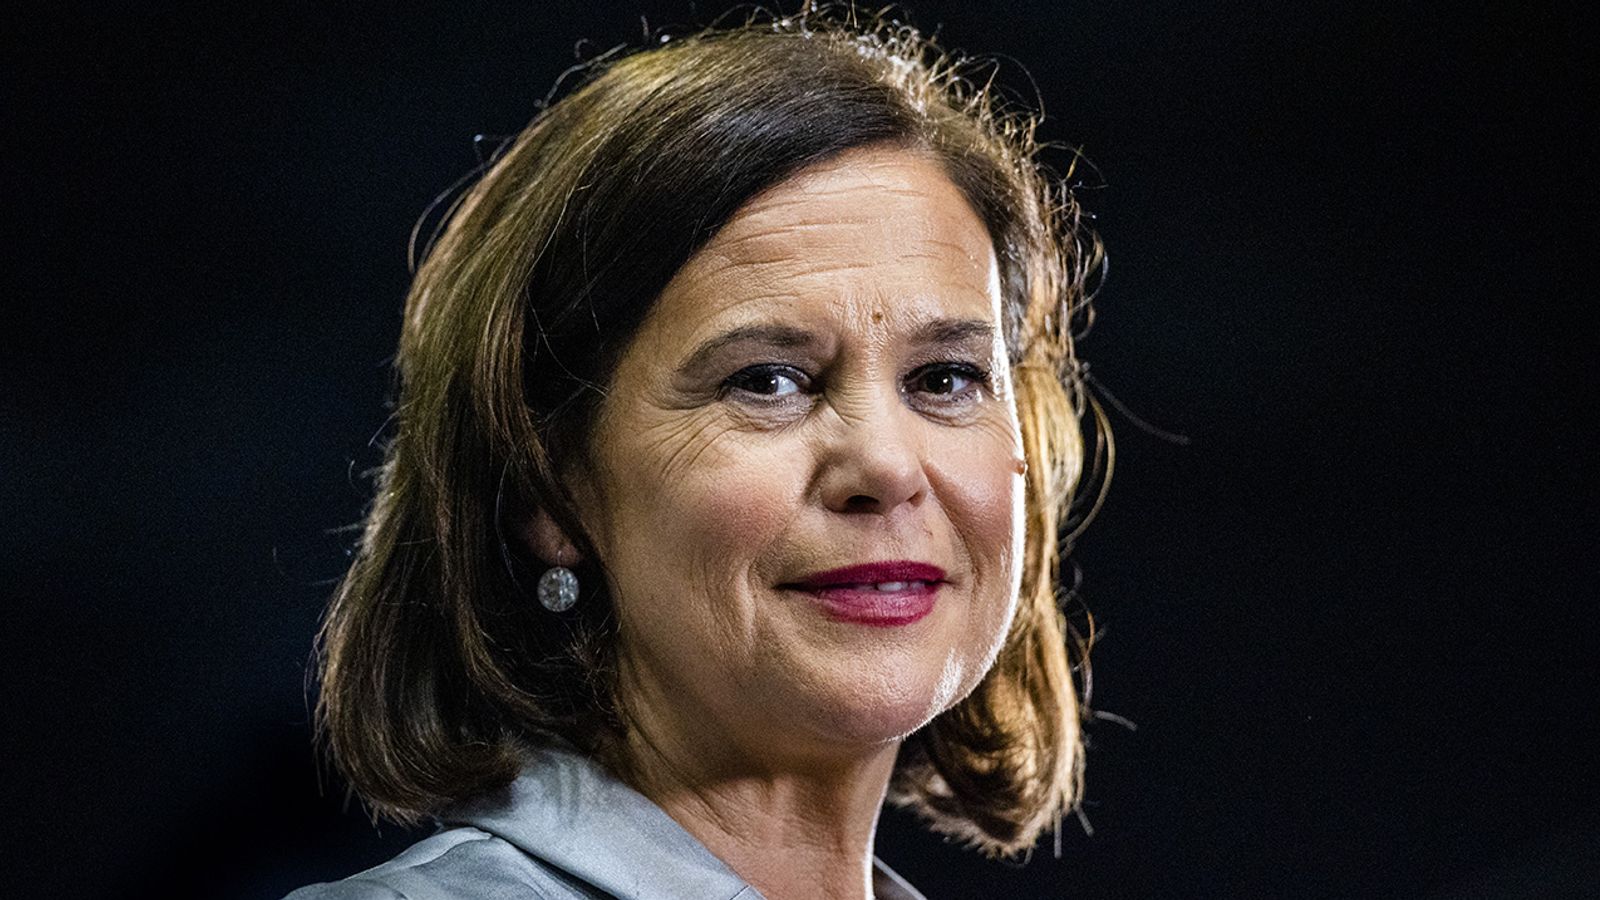 Sinn Fein leader Mary Lou McDonald admits Northern Ireland Protocol is 'problematic' - and expects referendum on unification within next decade